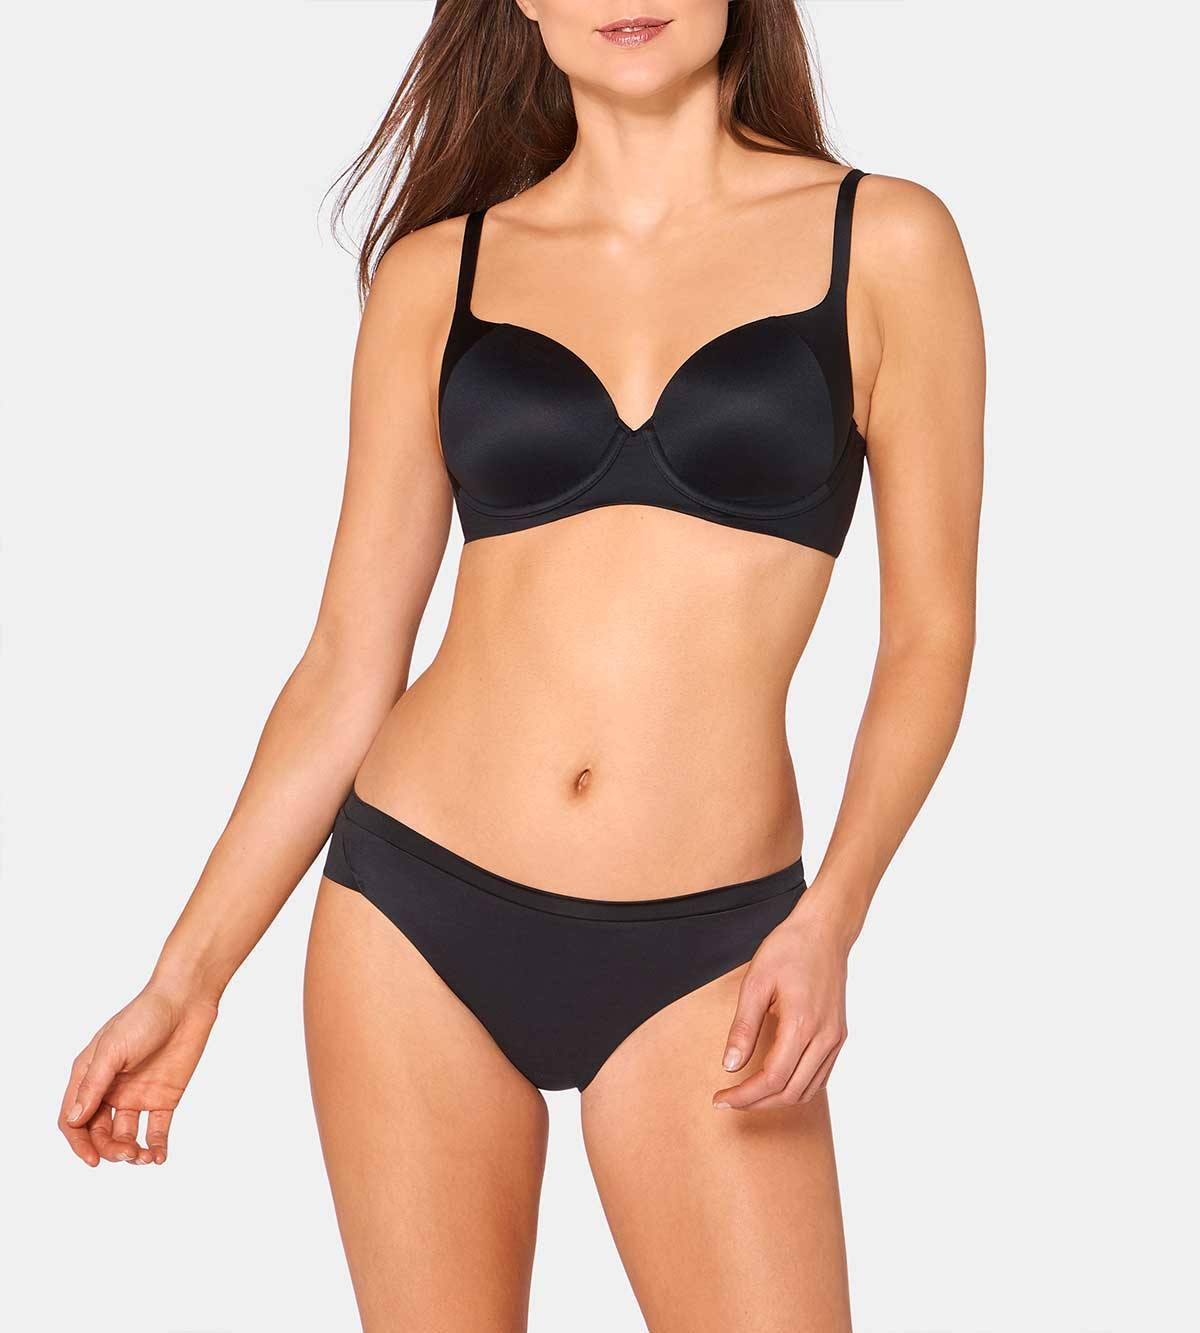 Triumph Body Make-up Soft Touch - Underwire Bra  Available at Illusions Lingerie